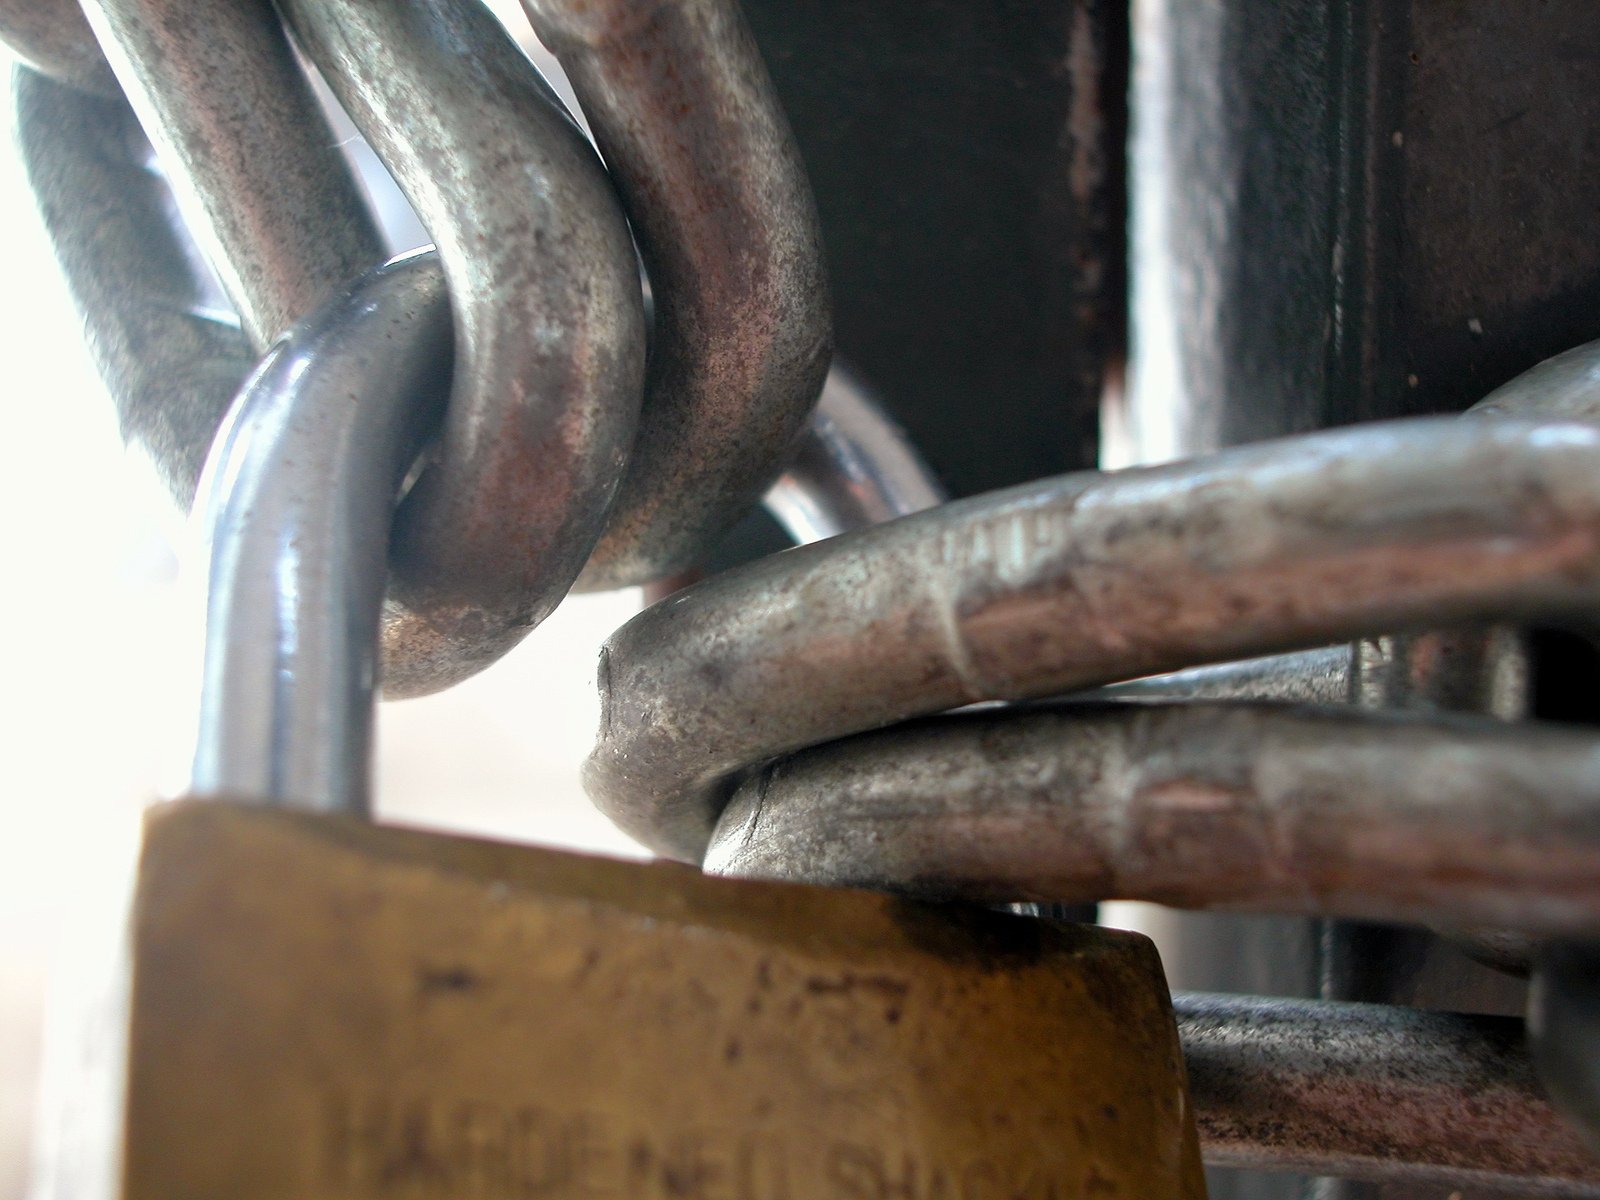 several rusty metal links are hung by the lock of a large steel object